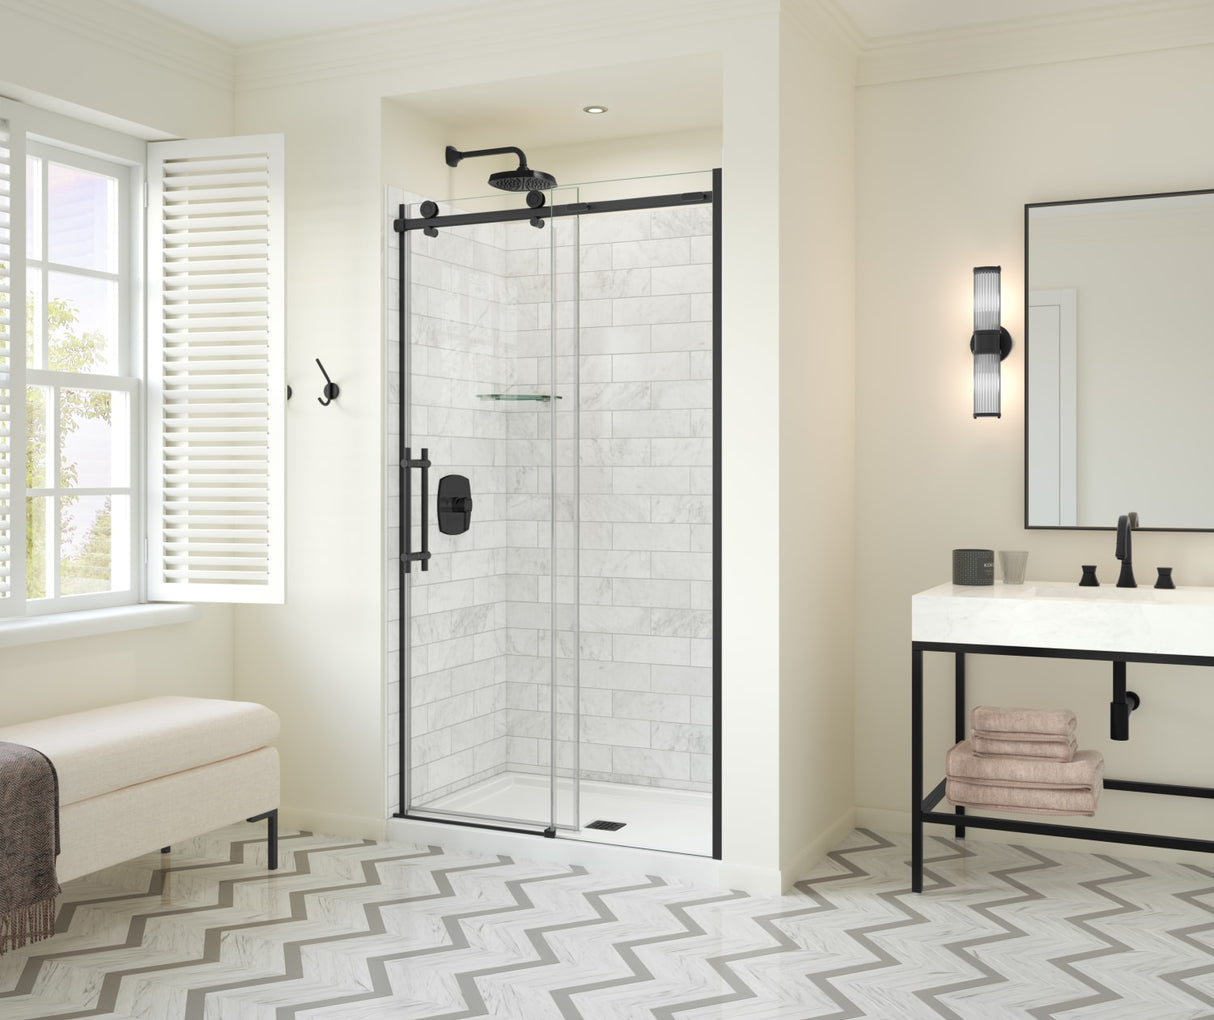 MAAX 137421-900-340-000 Odyssey SC 45-47 ½ x 78in. 8 mm Sliding Shower Door for Alcove Installation with Clear glass in Matte Black